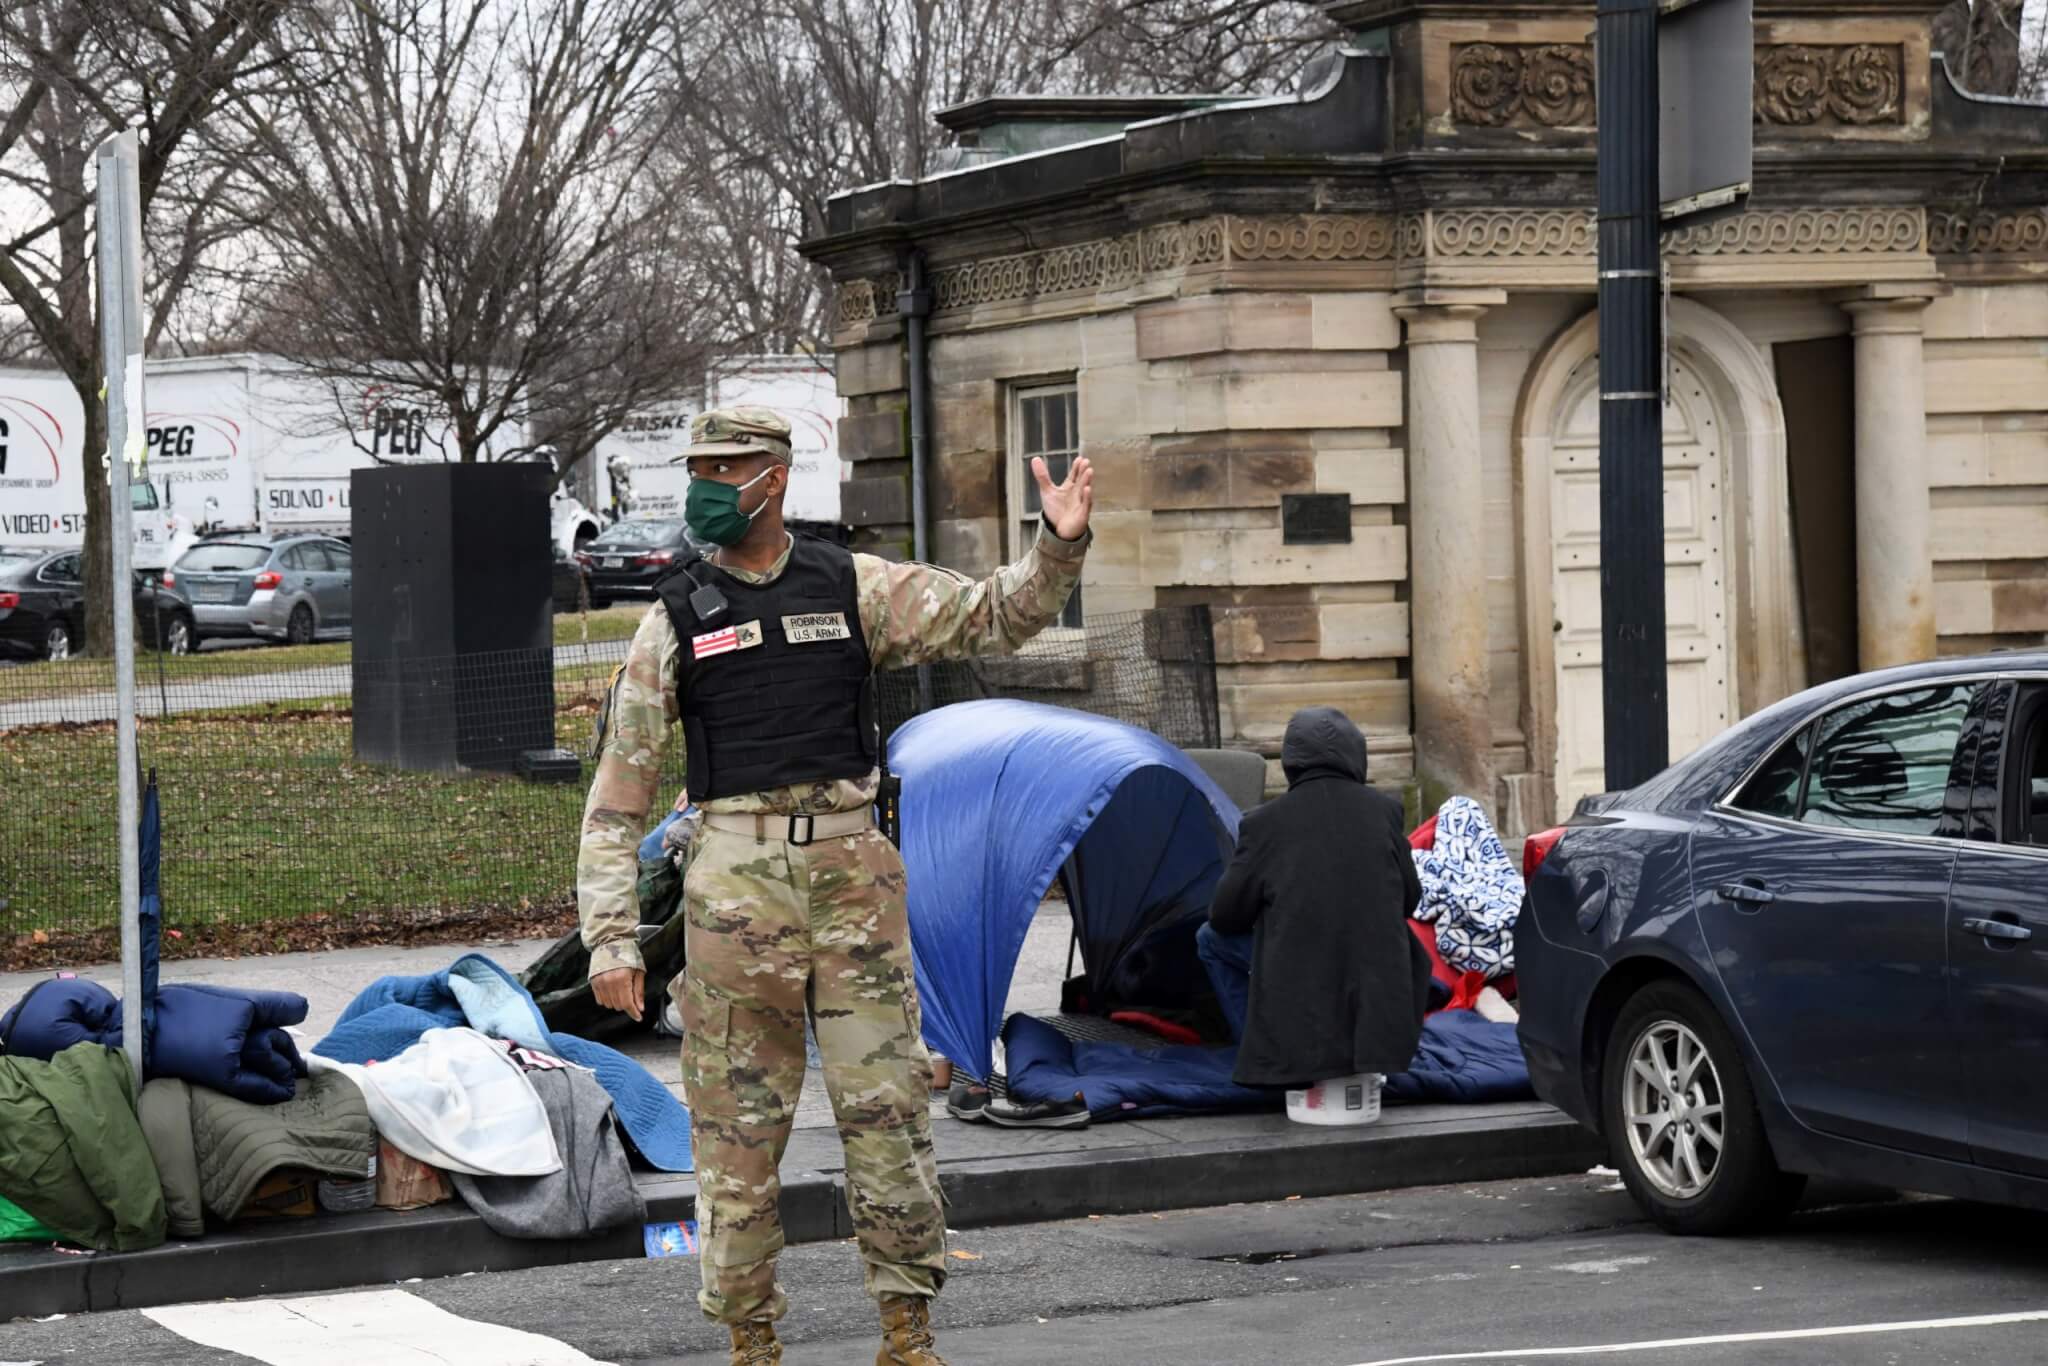 Staff Sgt. Marcus Robinson, mechanic with the 273rd military police company DC national guard, thumbs up a driver in Washington, D.C on January 5, 2021. The District of Columbia National Guard activated several hundred personnel to support the city government during expected demonstrations.